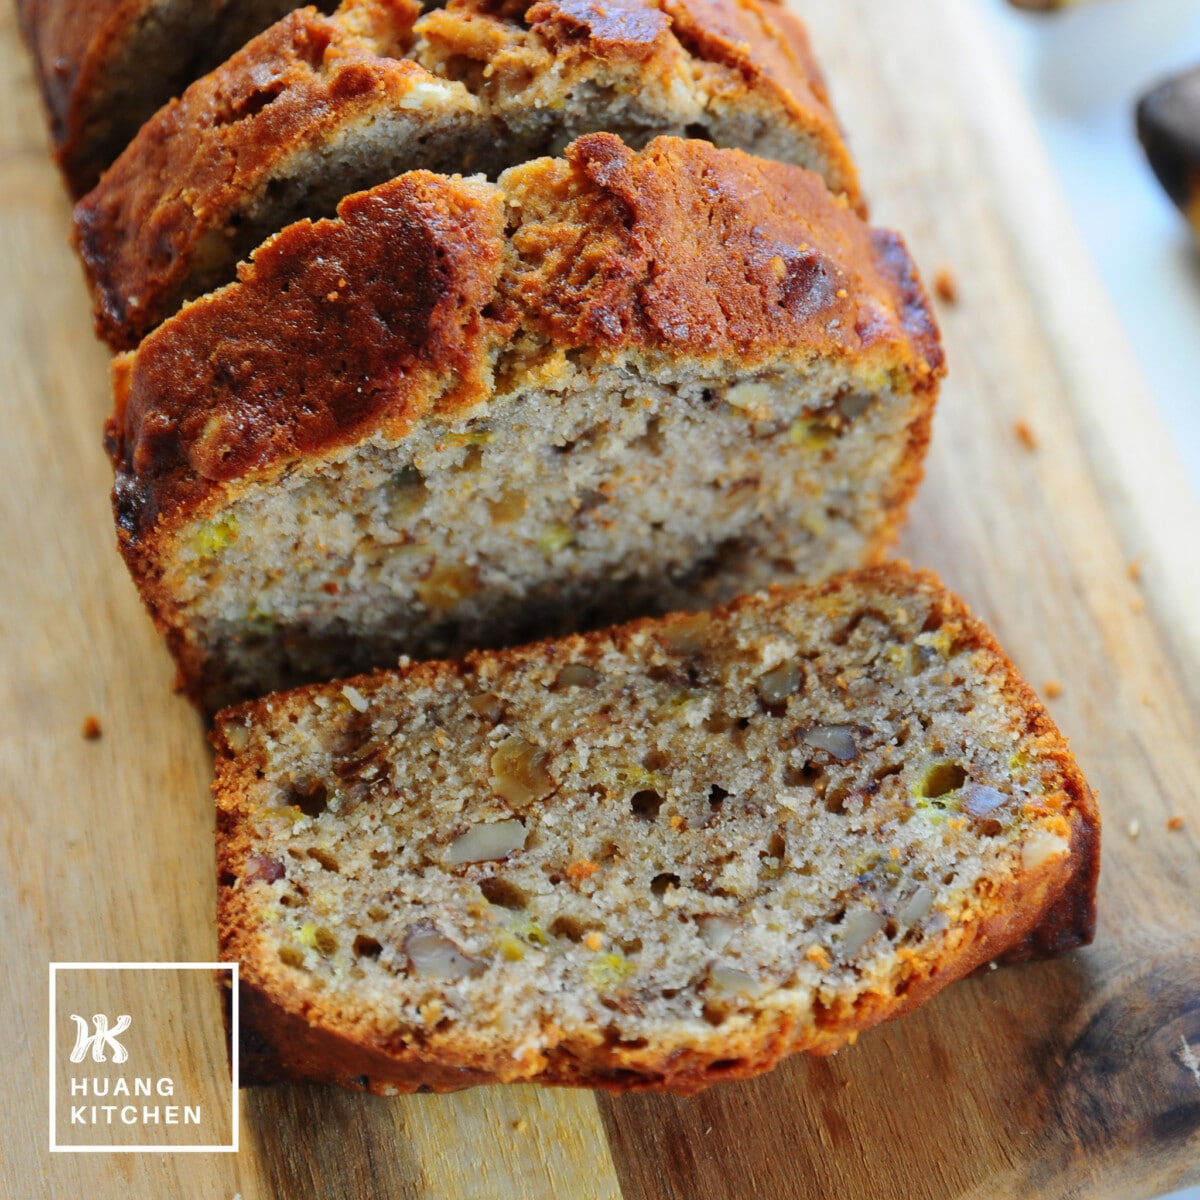 Homemade Banana Bread Recipe by Huang Kitchen - Cut into thick slices.